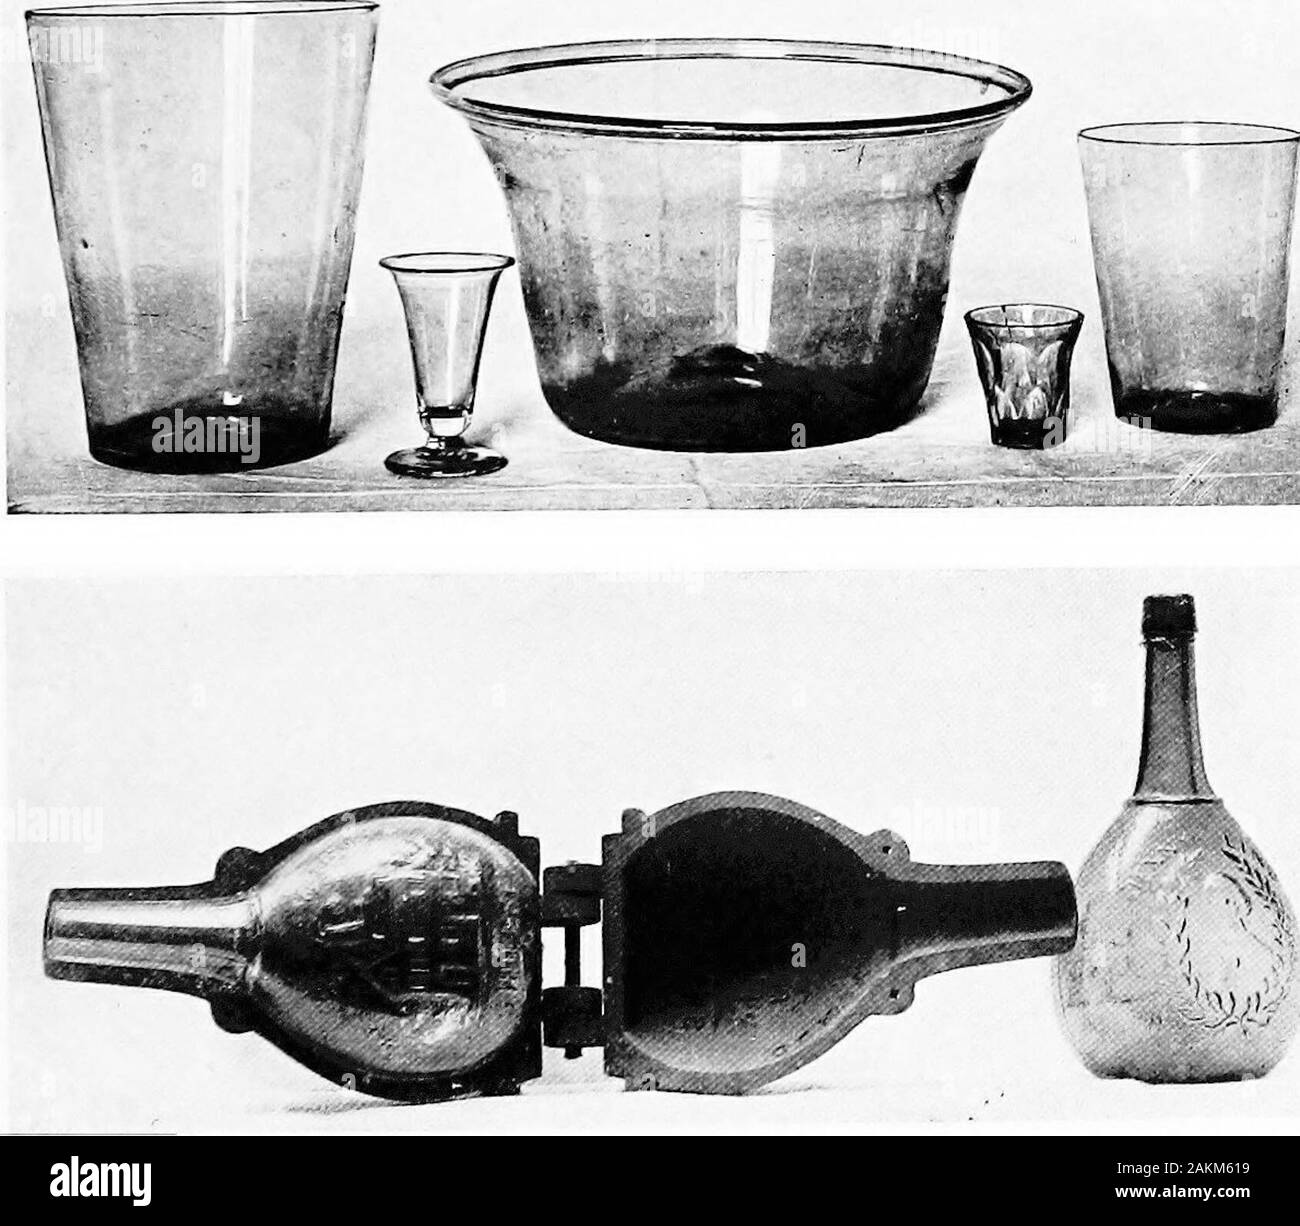 The practical book of early American arts and crafts . 1 and 2 Green Glass Saucer and Milk Bowl, New Jersey, Early Eighteenth Century 3-7 Tumblers, Wine Glasses and Milk Bowl, Eighteenth and Early Nineteenth Centuries Courtesy of Pennsylvania Museum and School of Industrial Art 8 and 9, Bottle Mould and Moulded Bottle, Early Nineteenth Century Courtesy of Pennsylvania Museum and School of Industrial Art Stock Photo